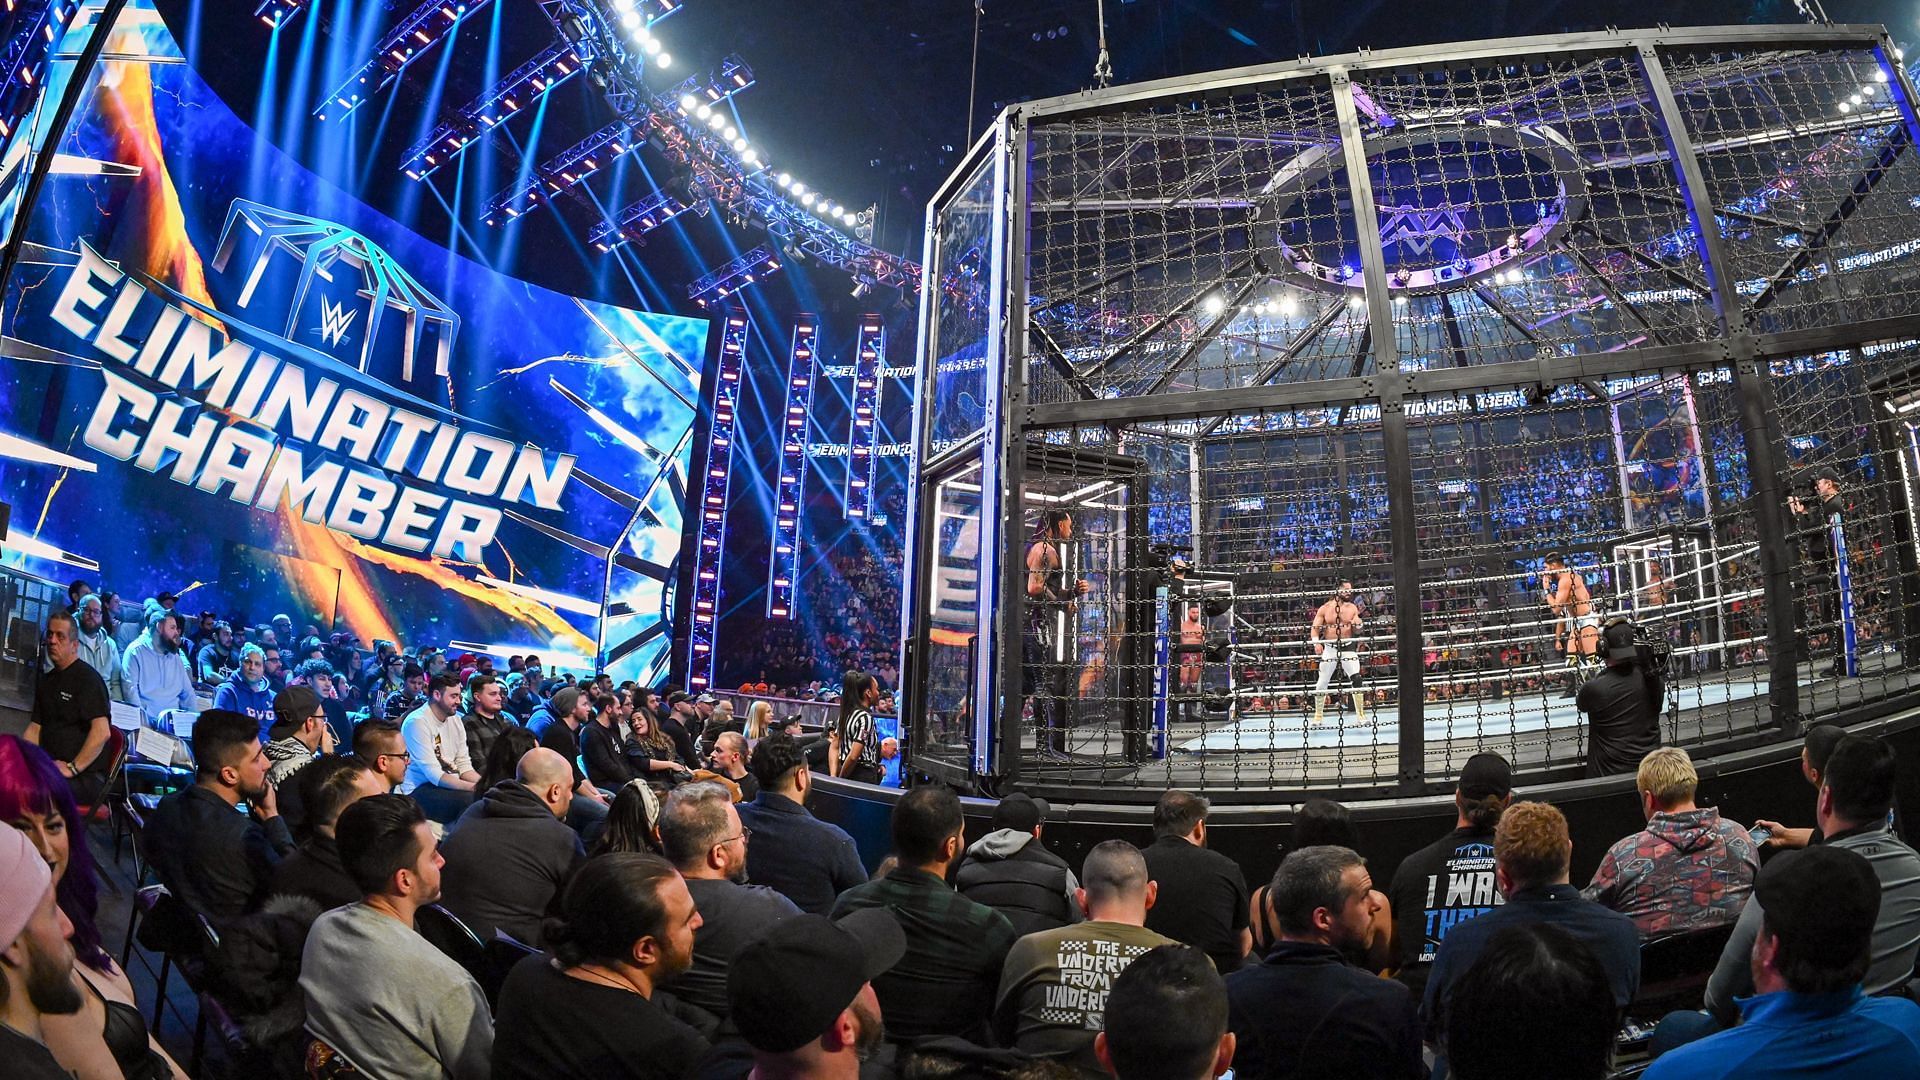 The Elimination Chamber structure.